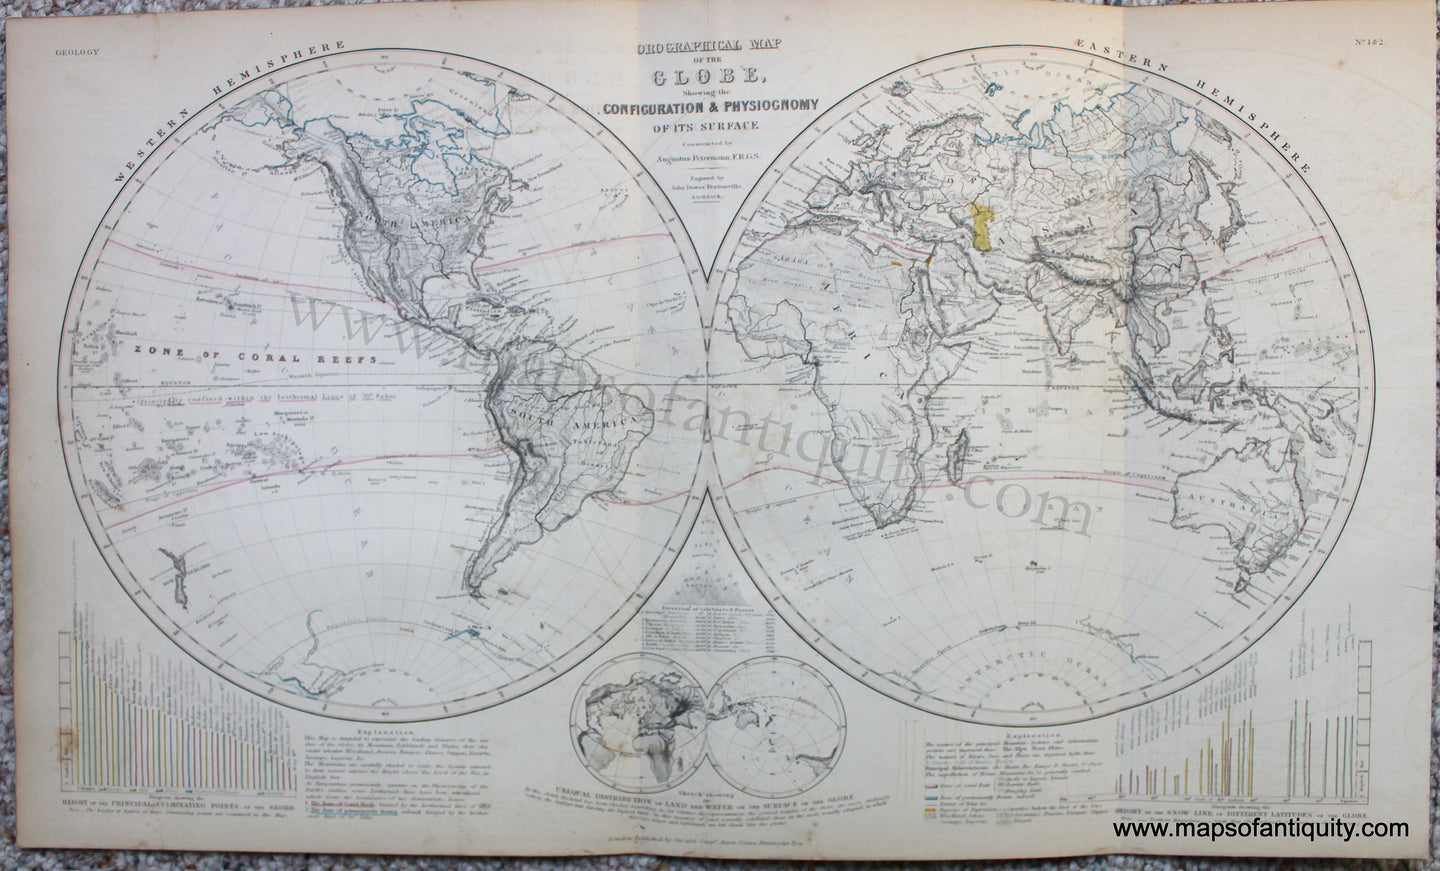 Genuine-Antique-Map-Orographical-Map-of-the-Globe-Showing-the-Configuration-&-Physiognomy-of-its-Surface.-World--1850-Petermann-/-Orr-/-Dower-Maps-Of-Antiquity-1800s-19th-century